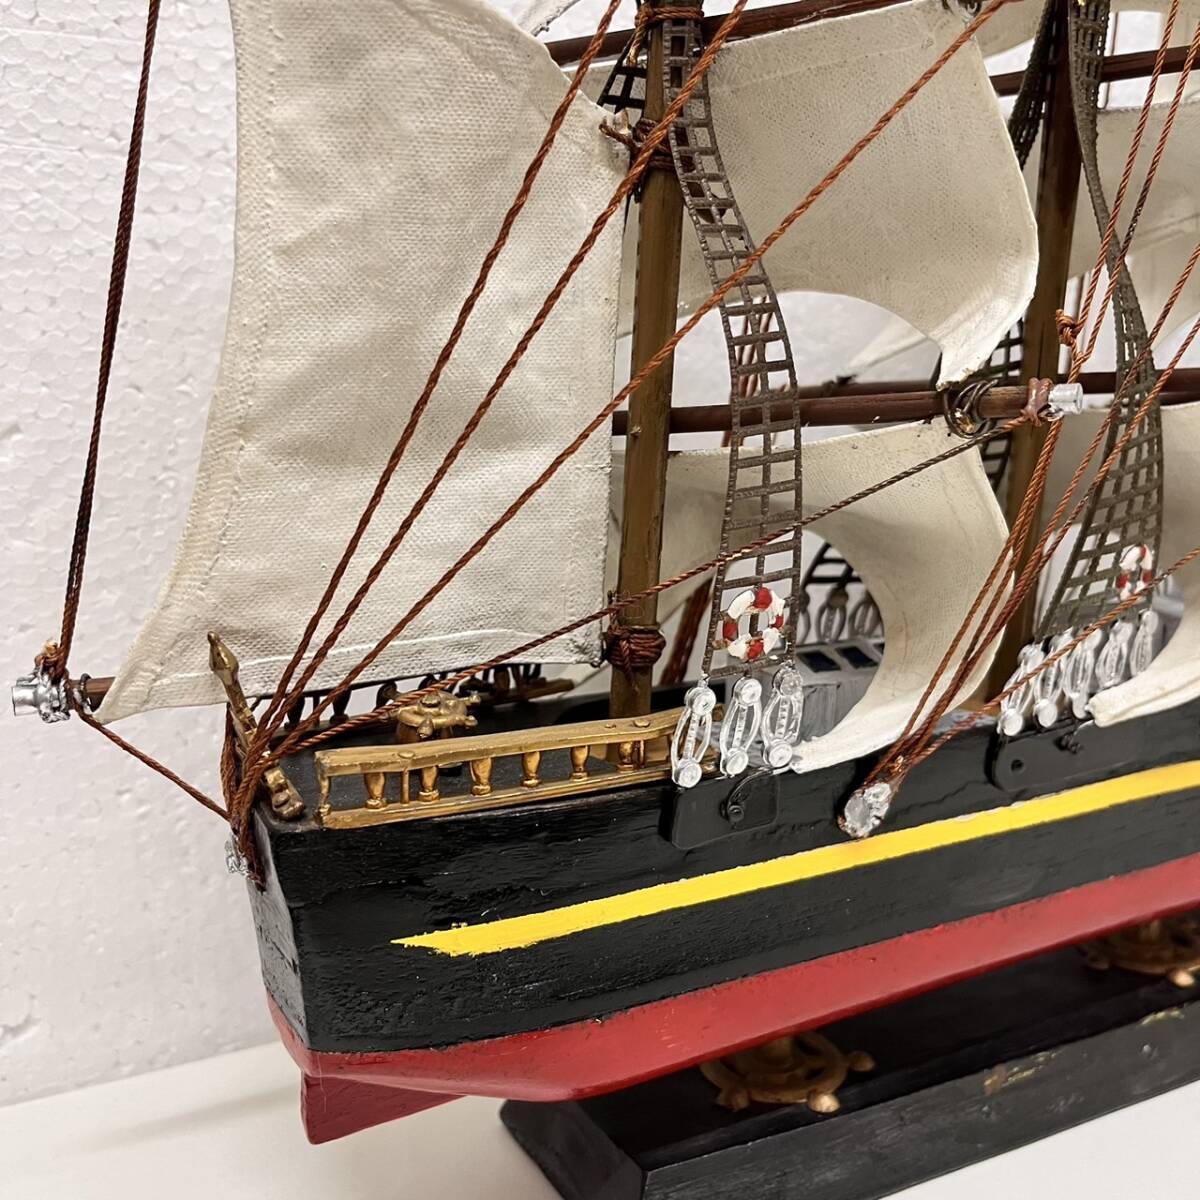 [C-25082]SEA WITCH 1846 year large sailing boat model sailing boat boat model wooden ornament interior decoration collection objet d'art collection 